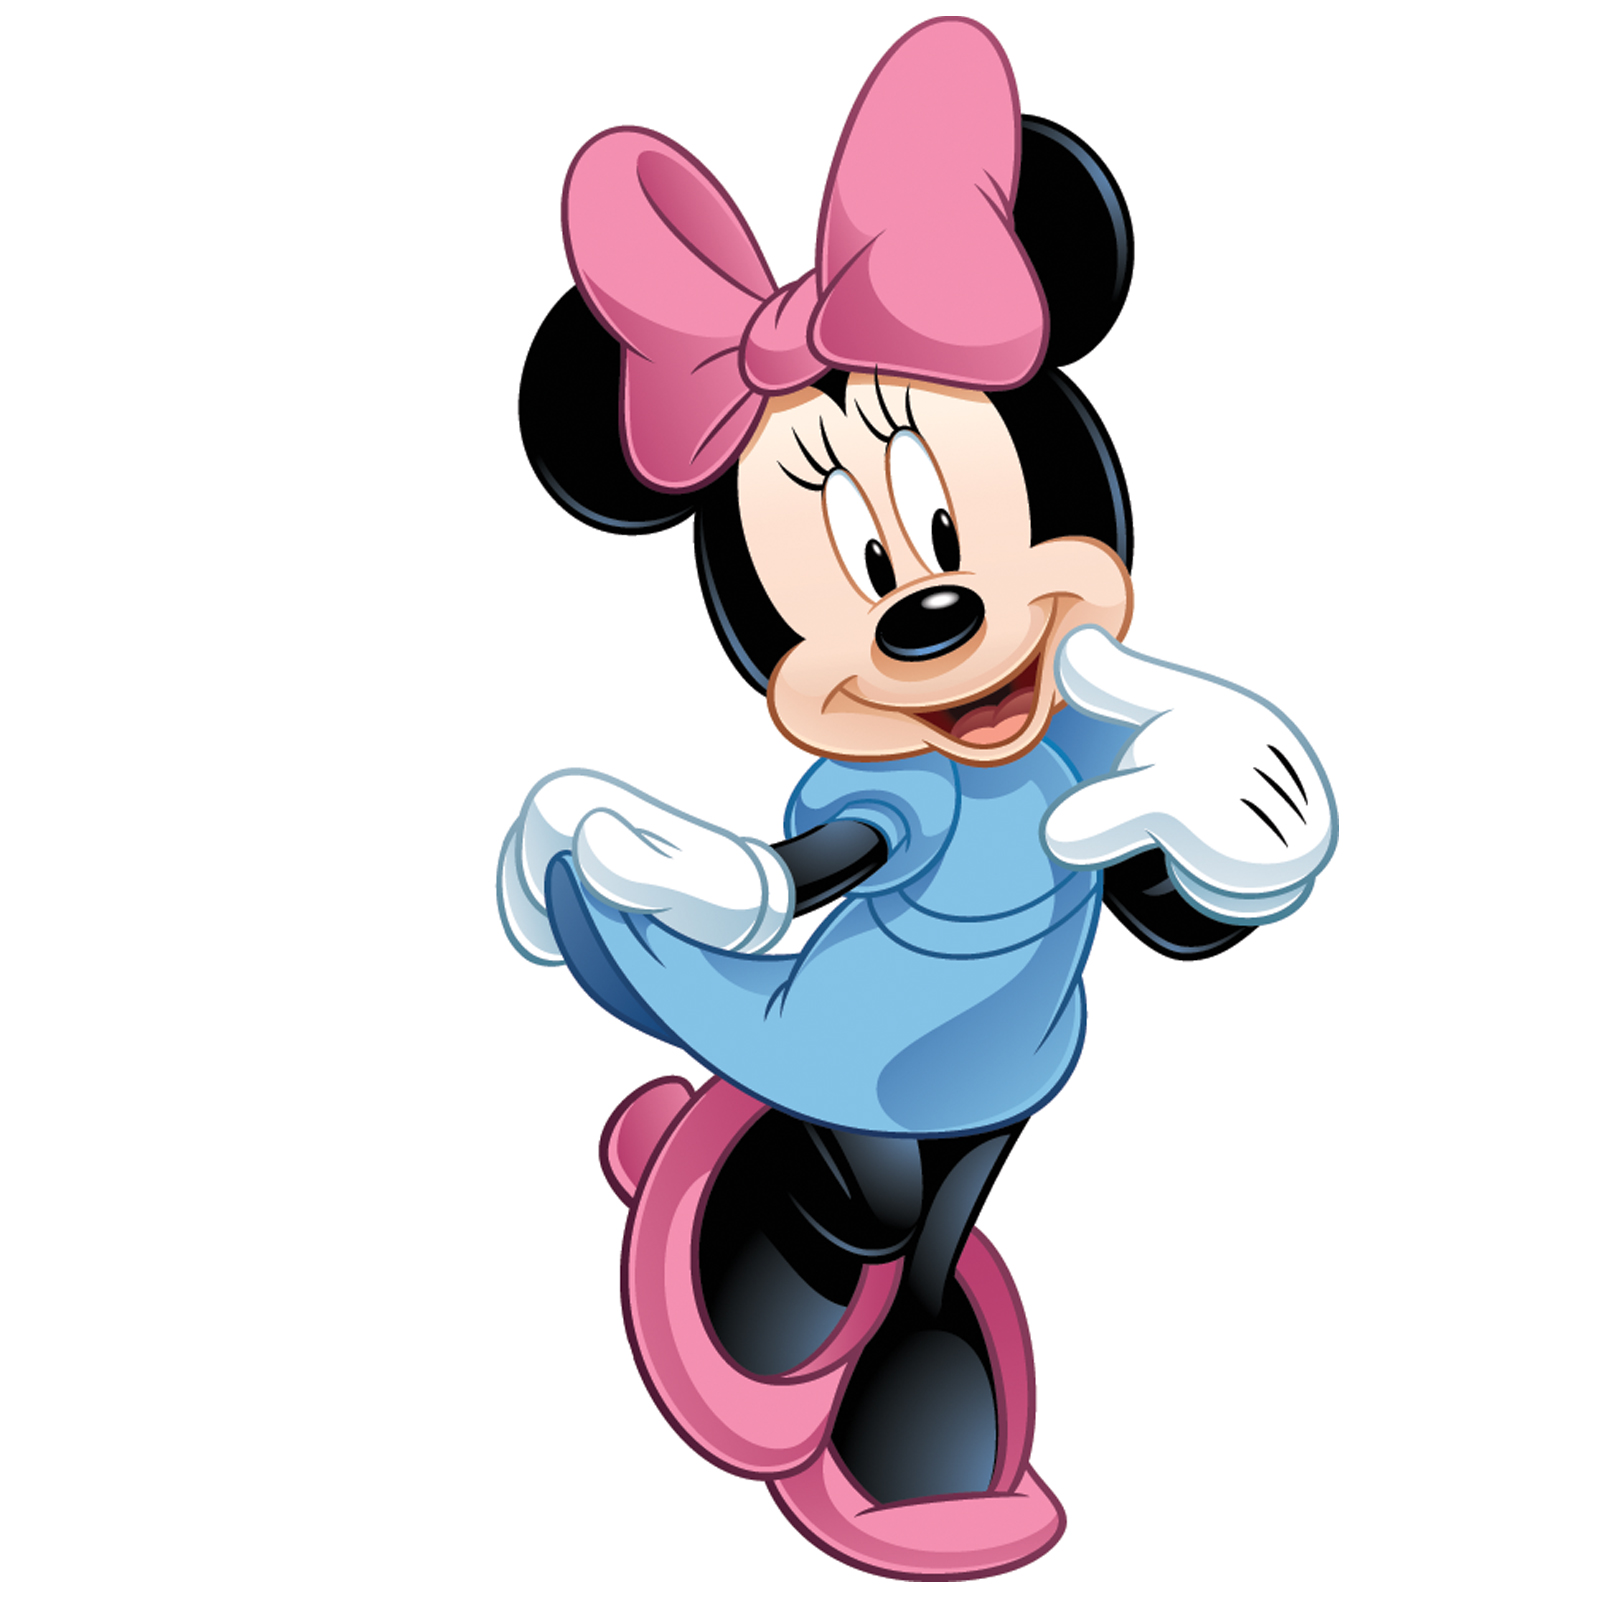 Hope You Like This Minnie HD Background As Much We Do